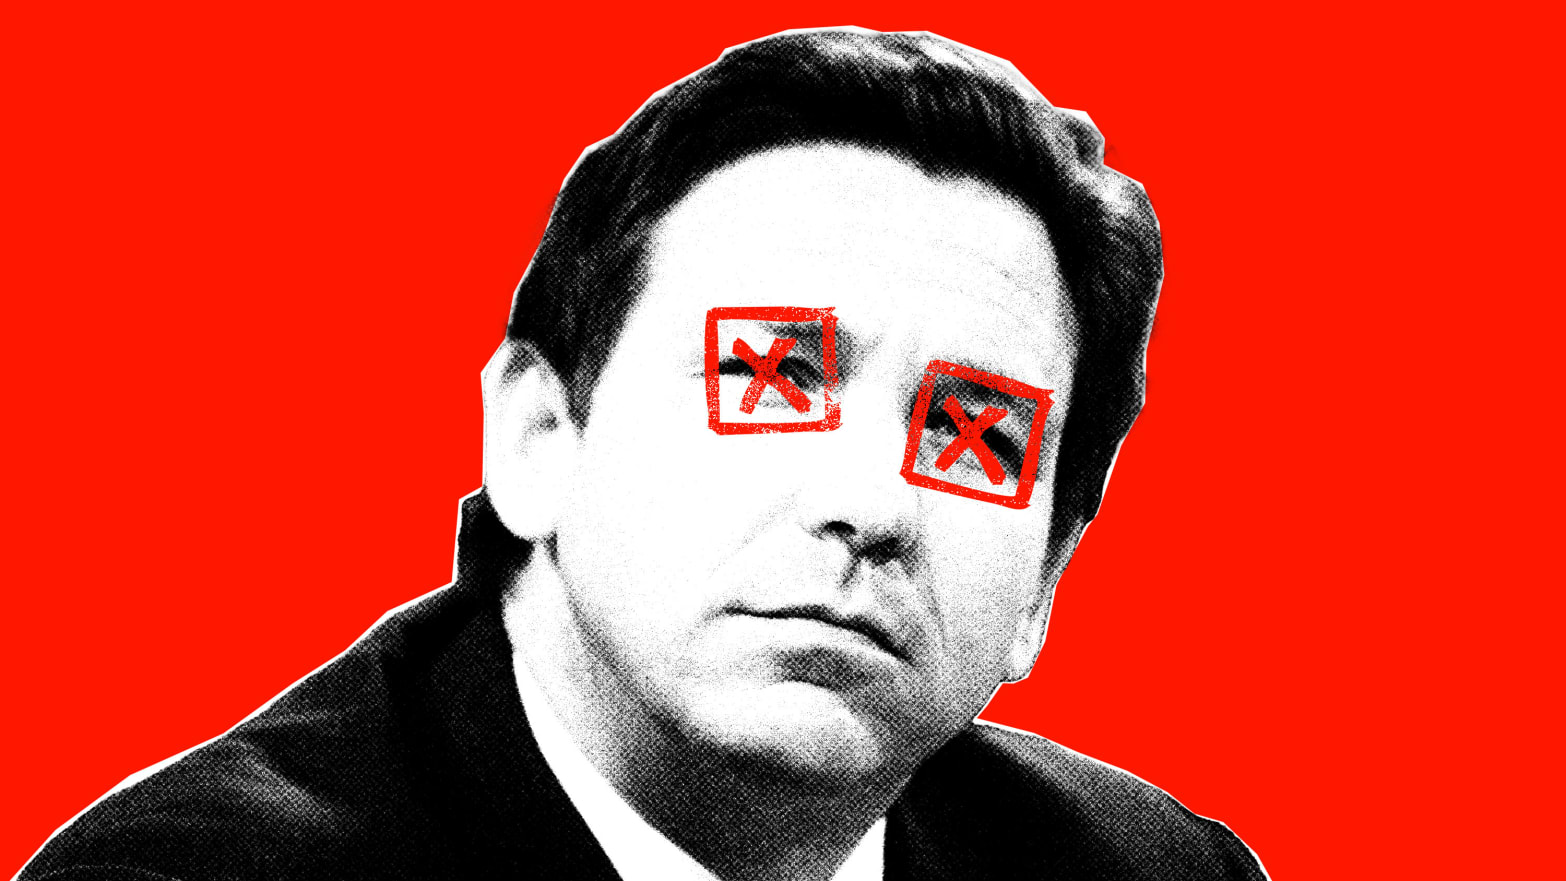 Photo illustration of Ron DeSantis with "x"s over his eyes on a red background